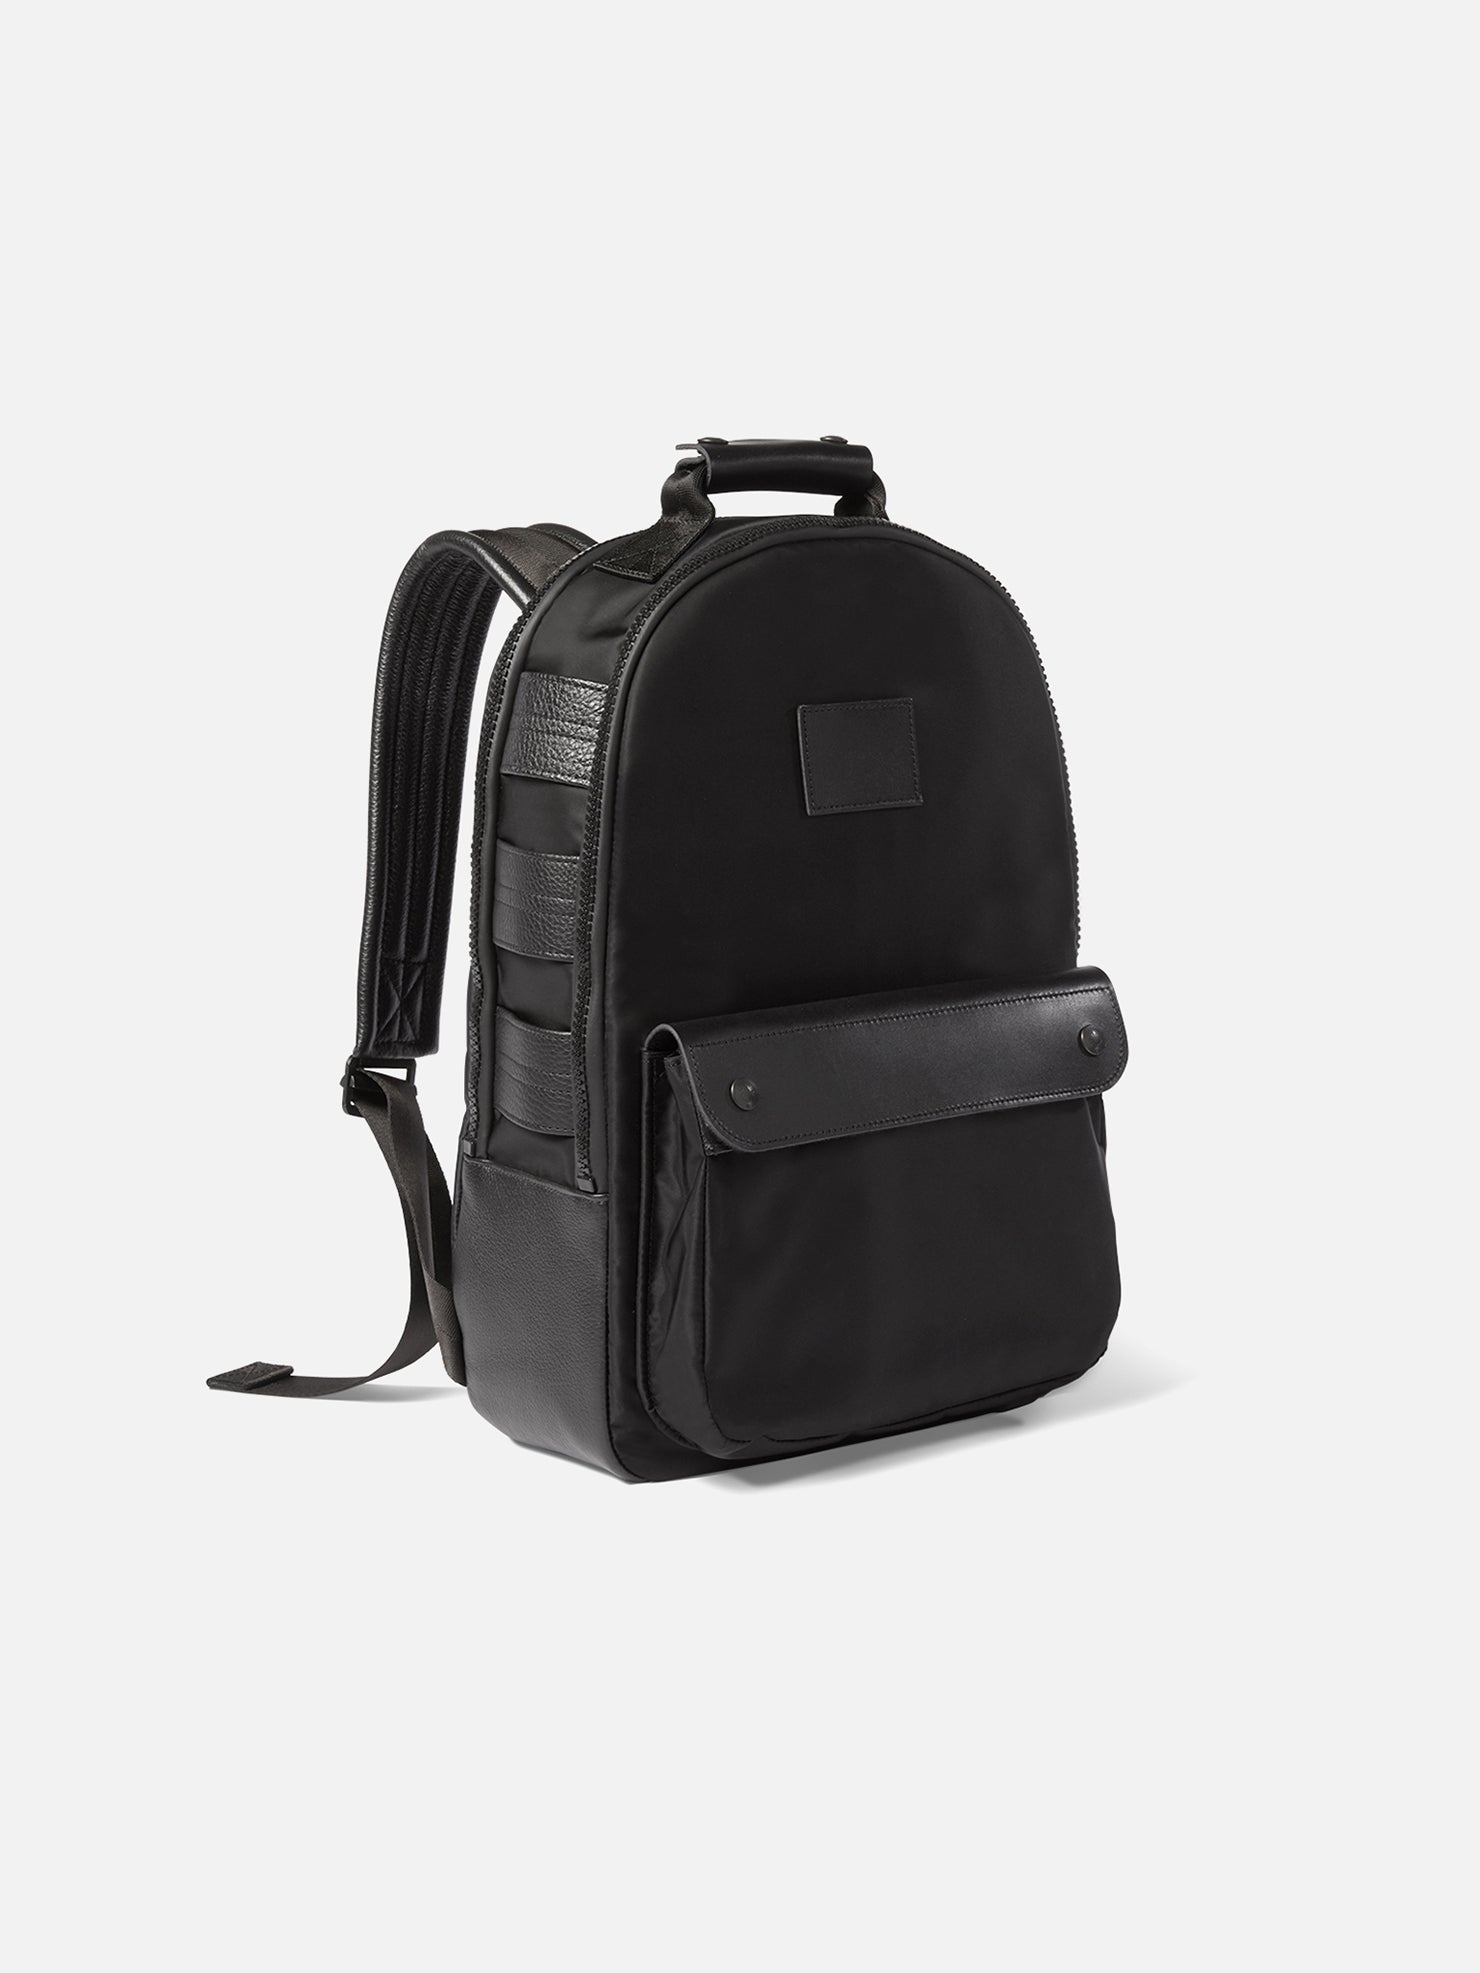 Spyder Waterproof Compact Day Backpack Black Color Authentic